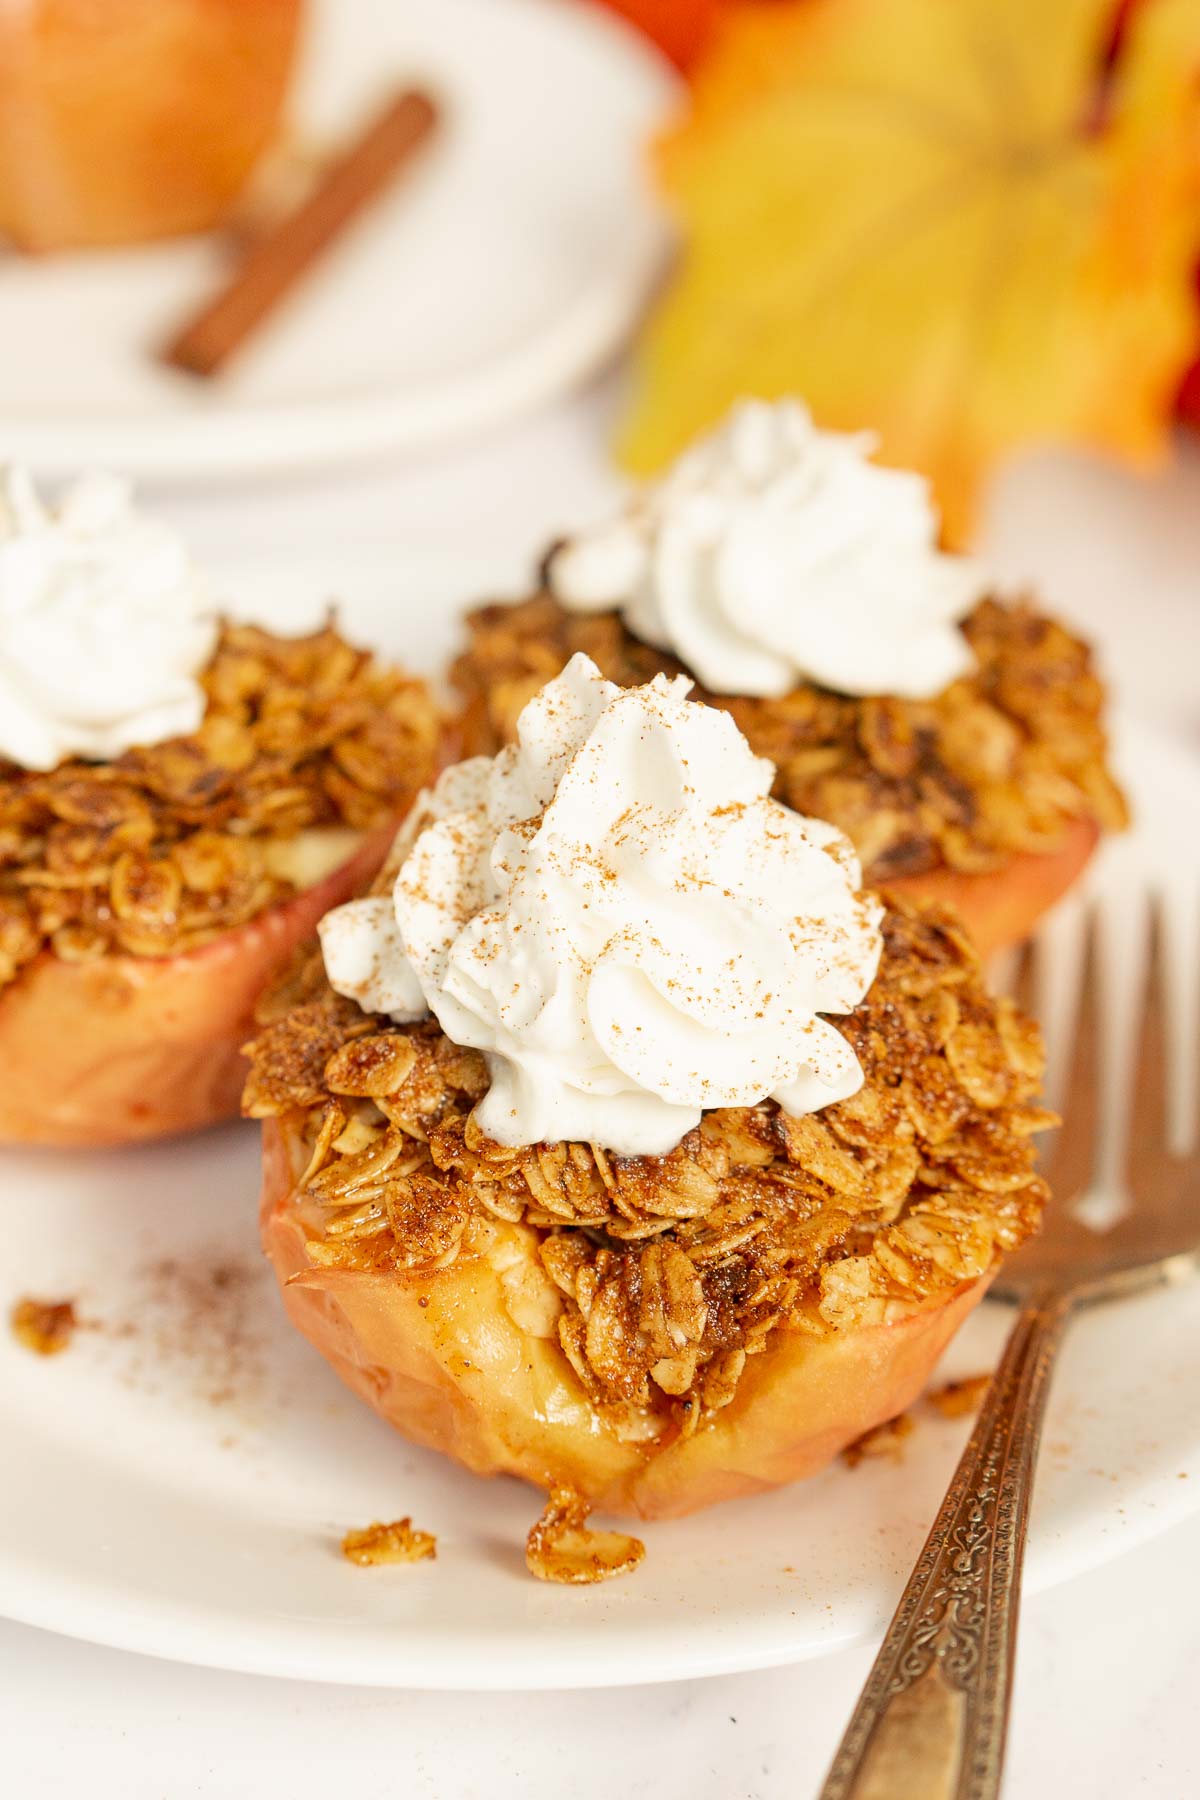 Air fryer baked apples with whipped cream on top